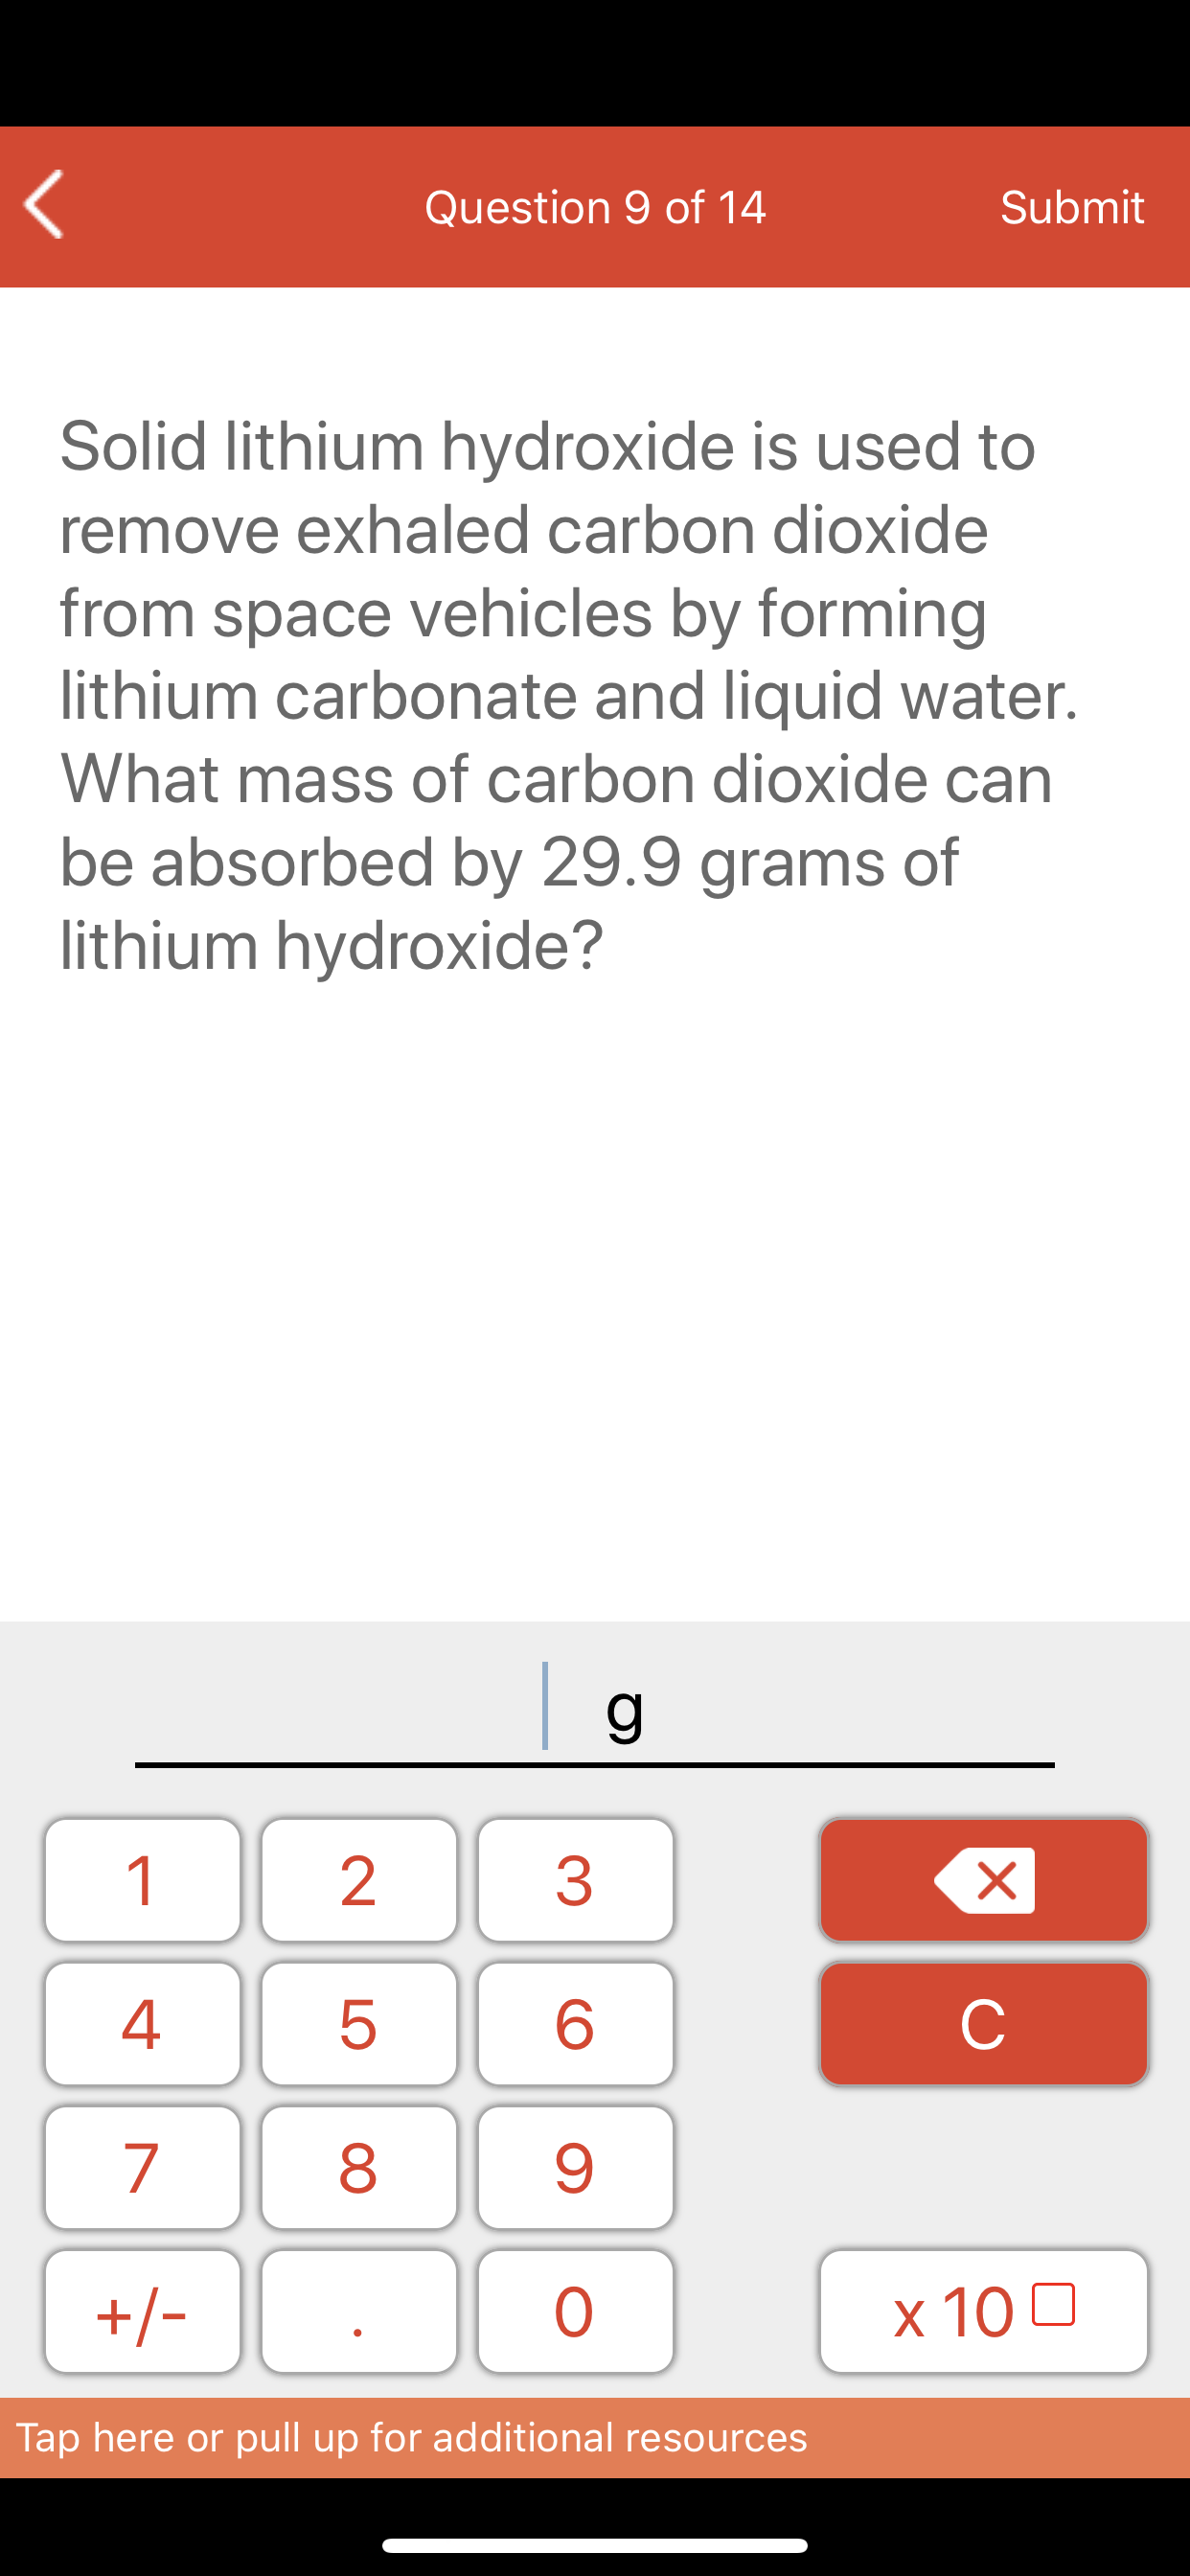 Solid lithium hydroxide is used to
remove exhaled carbon dioxide
from space vehicles by forming
lithium carbonate and liquid water.
What mass of carbon dioxide can
be absorbed by 29.9 grams of
lithium hydroxide?
